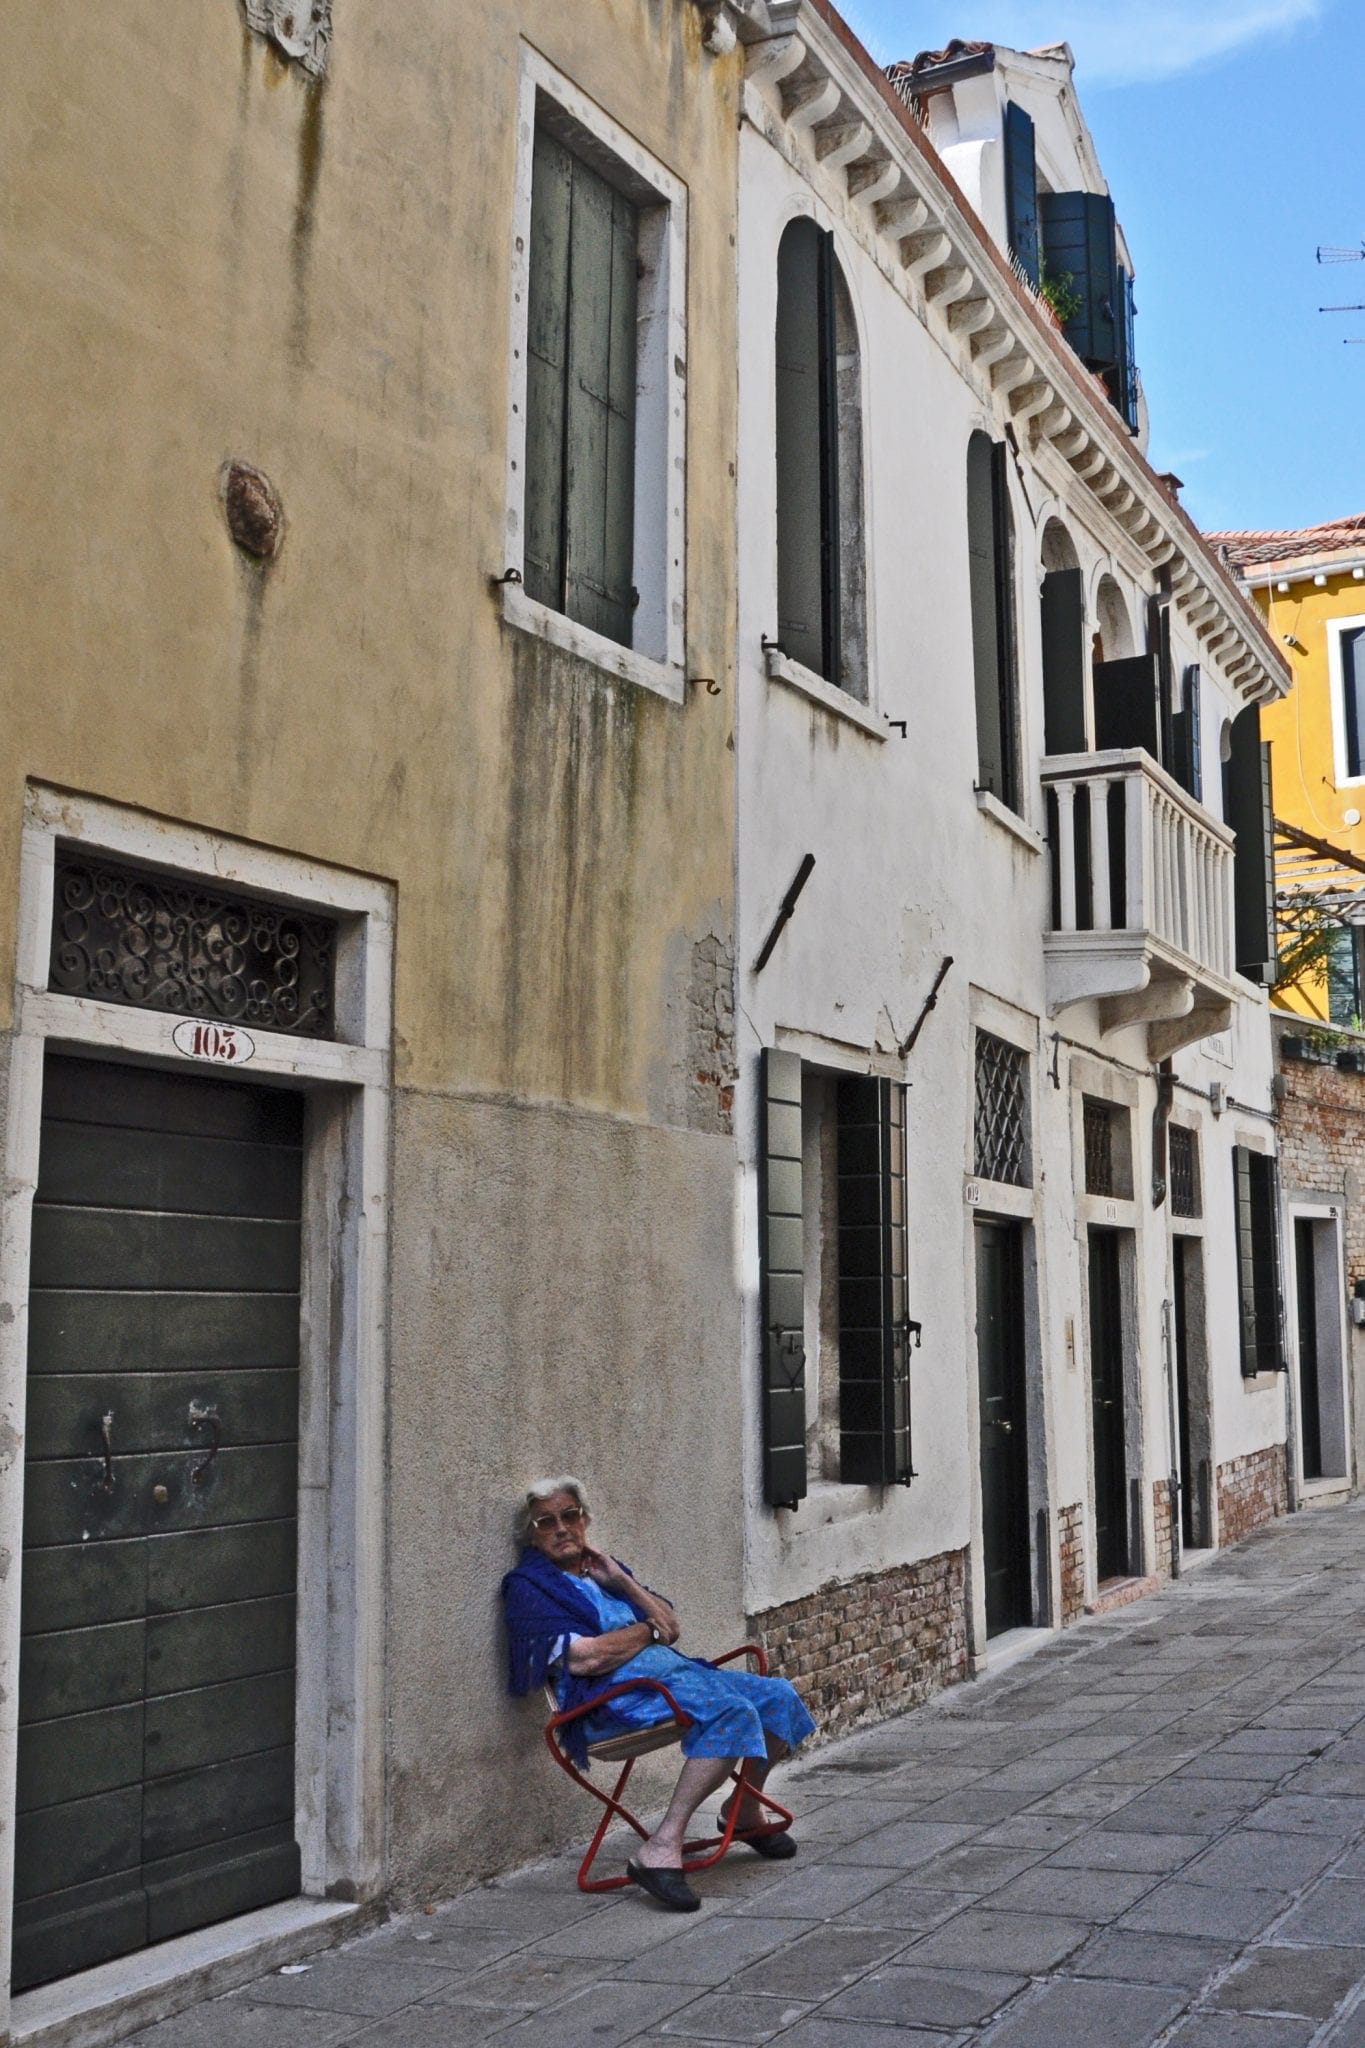 A woman relaxes in the The Castello neighborhood of Venice